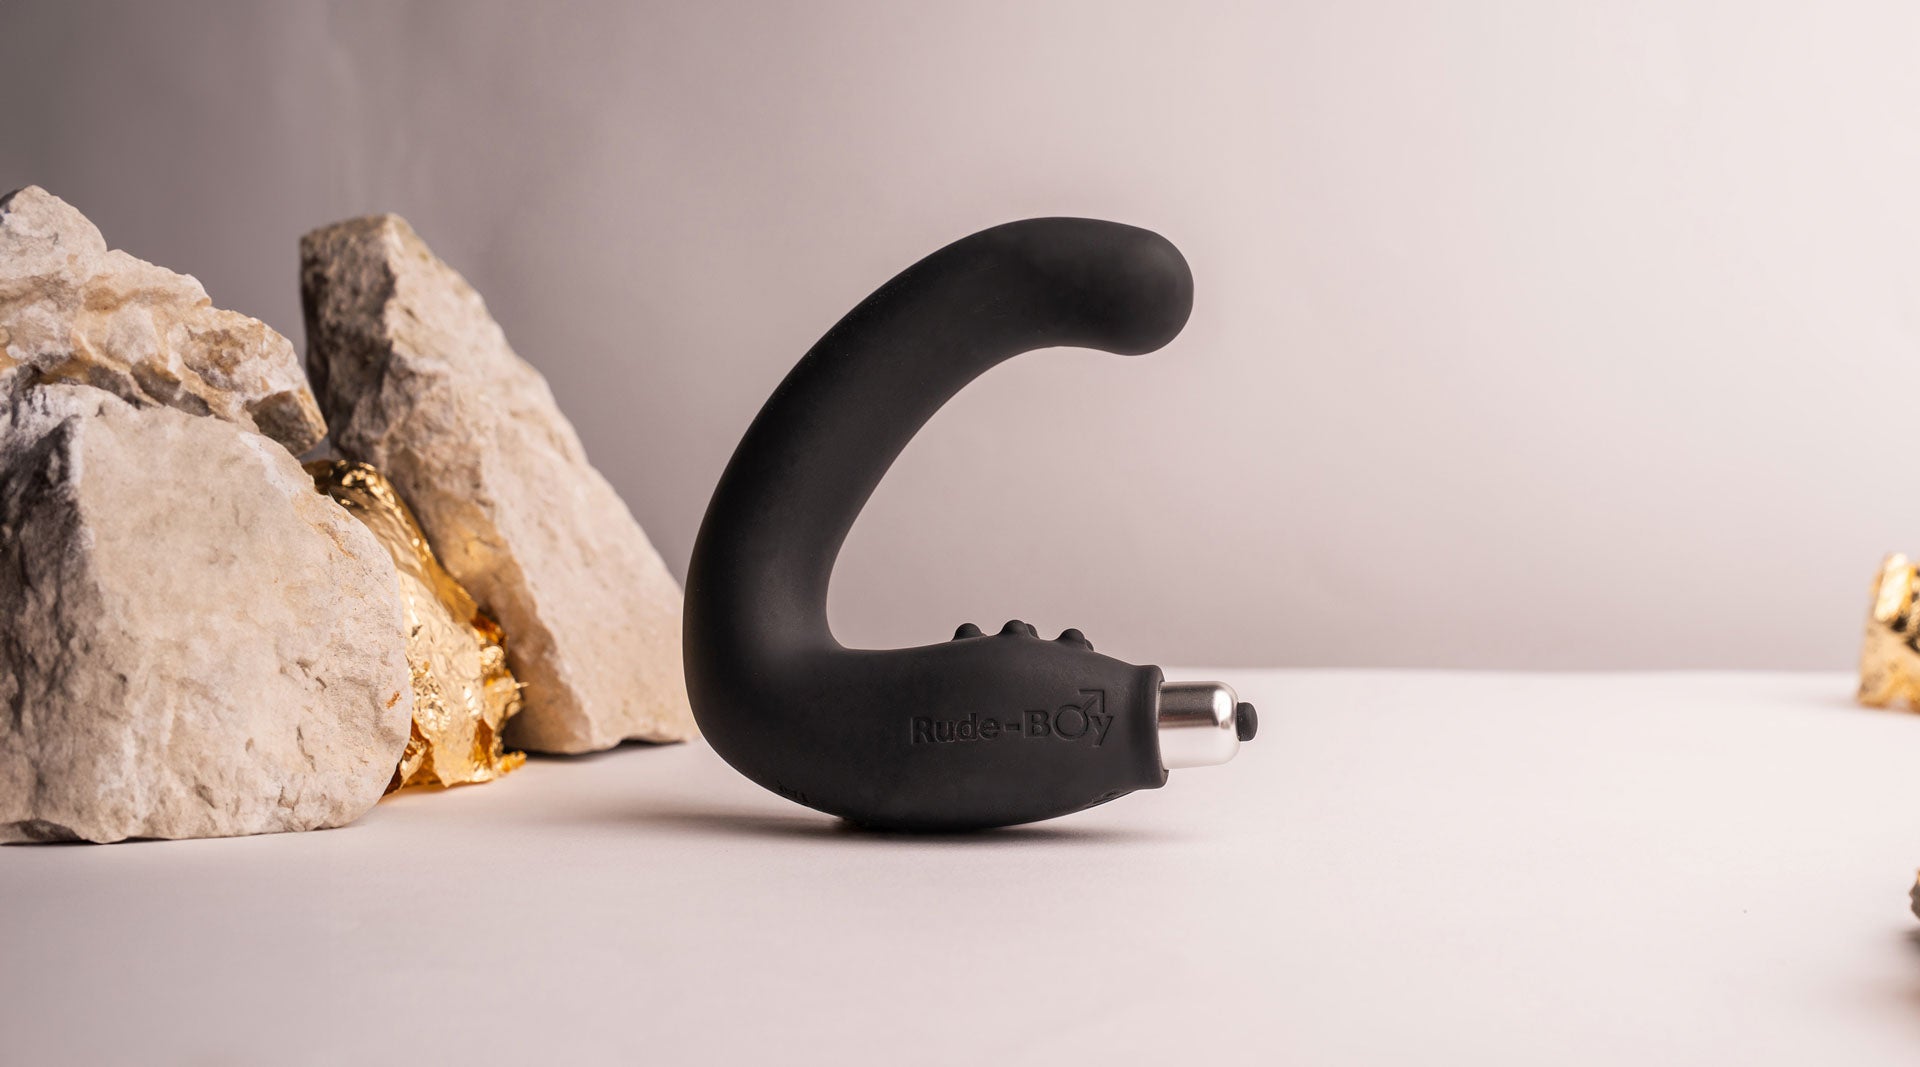 Silicone prostate massager with perineum stimulation points in black housing a removable bullet vibrator.